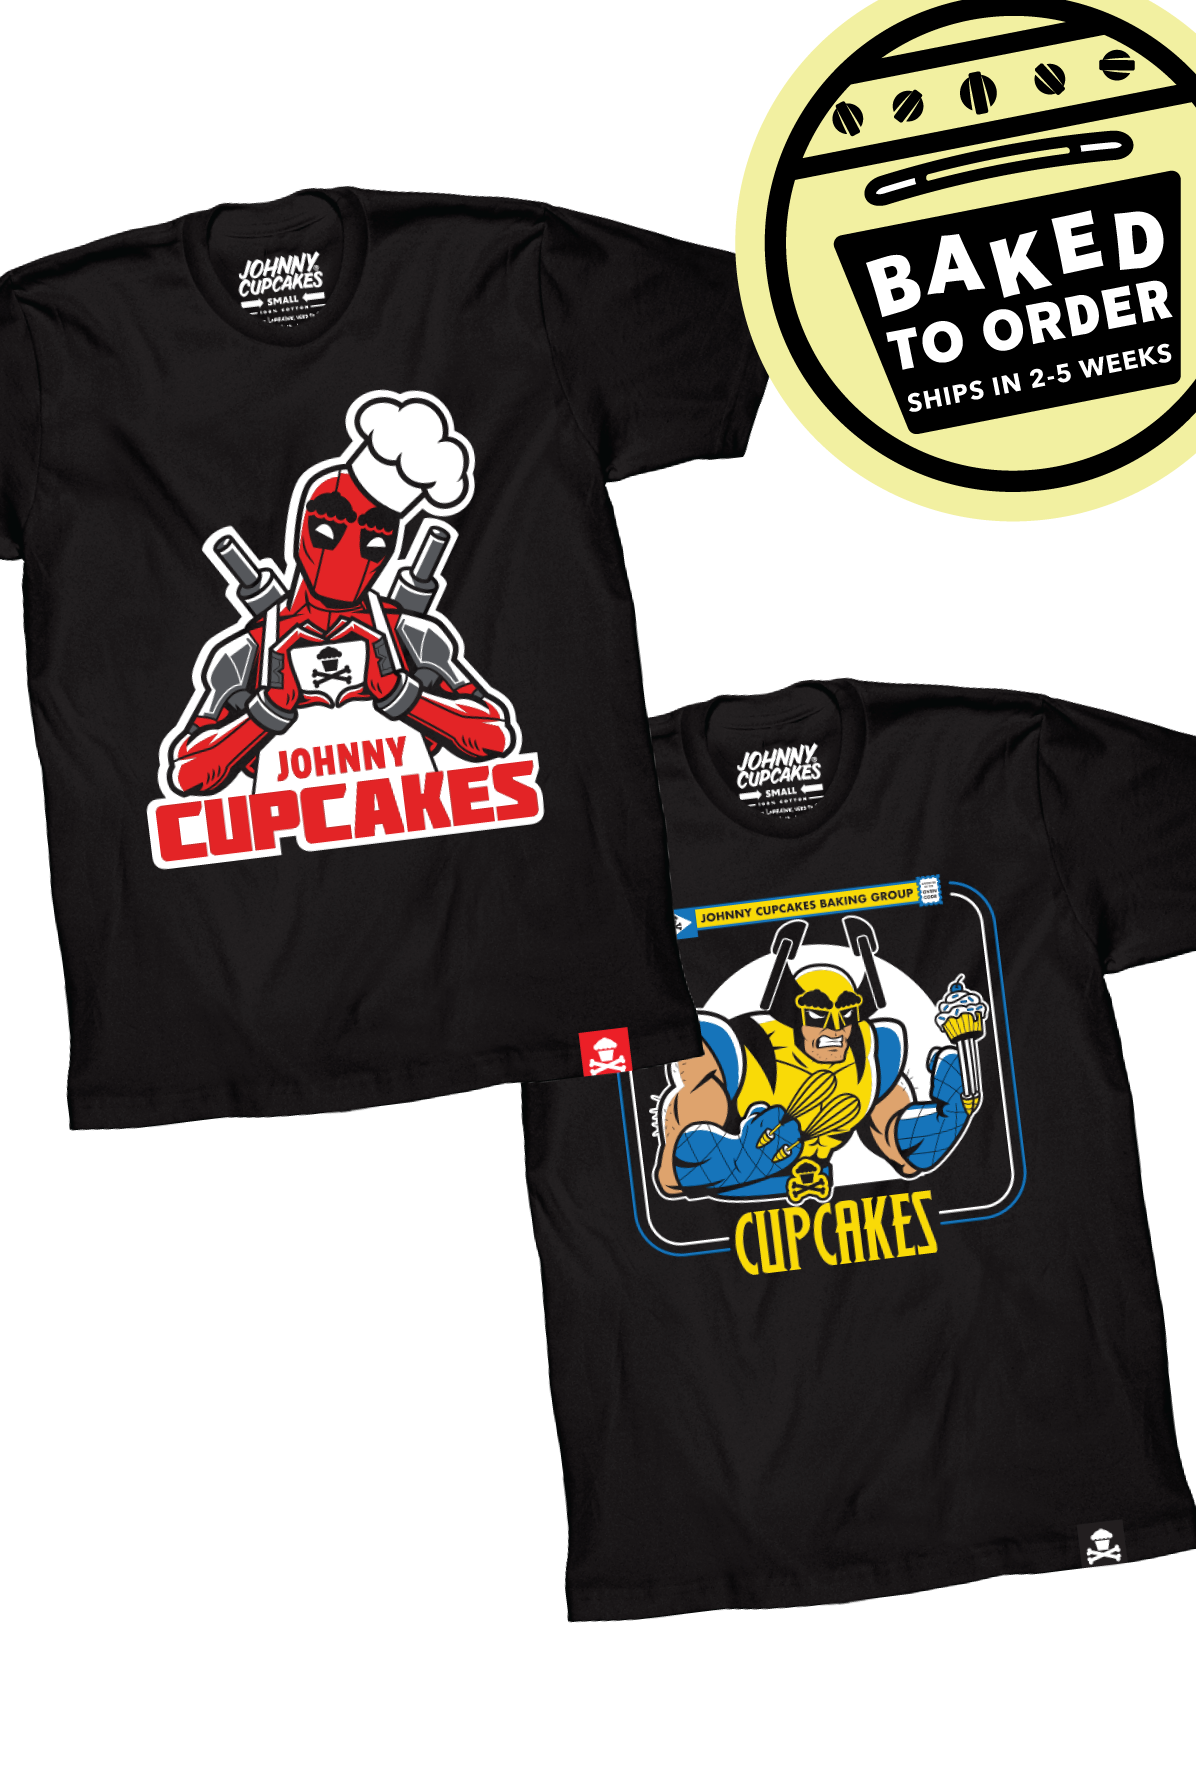 Comic Duo Bundle Deal - 2 Tees w/ Stickers